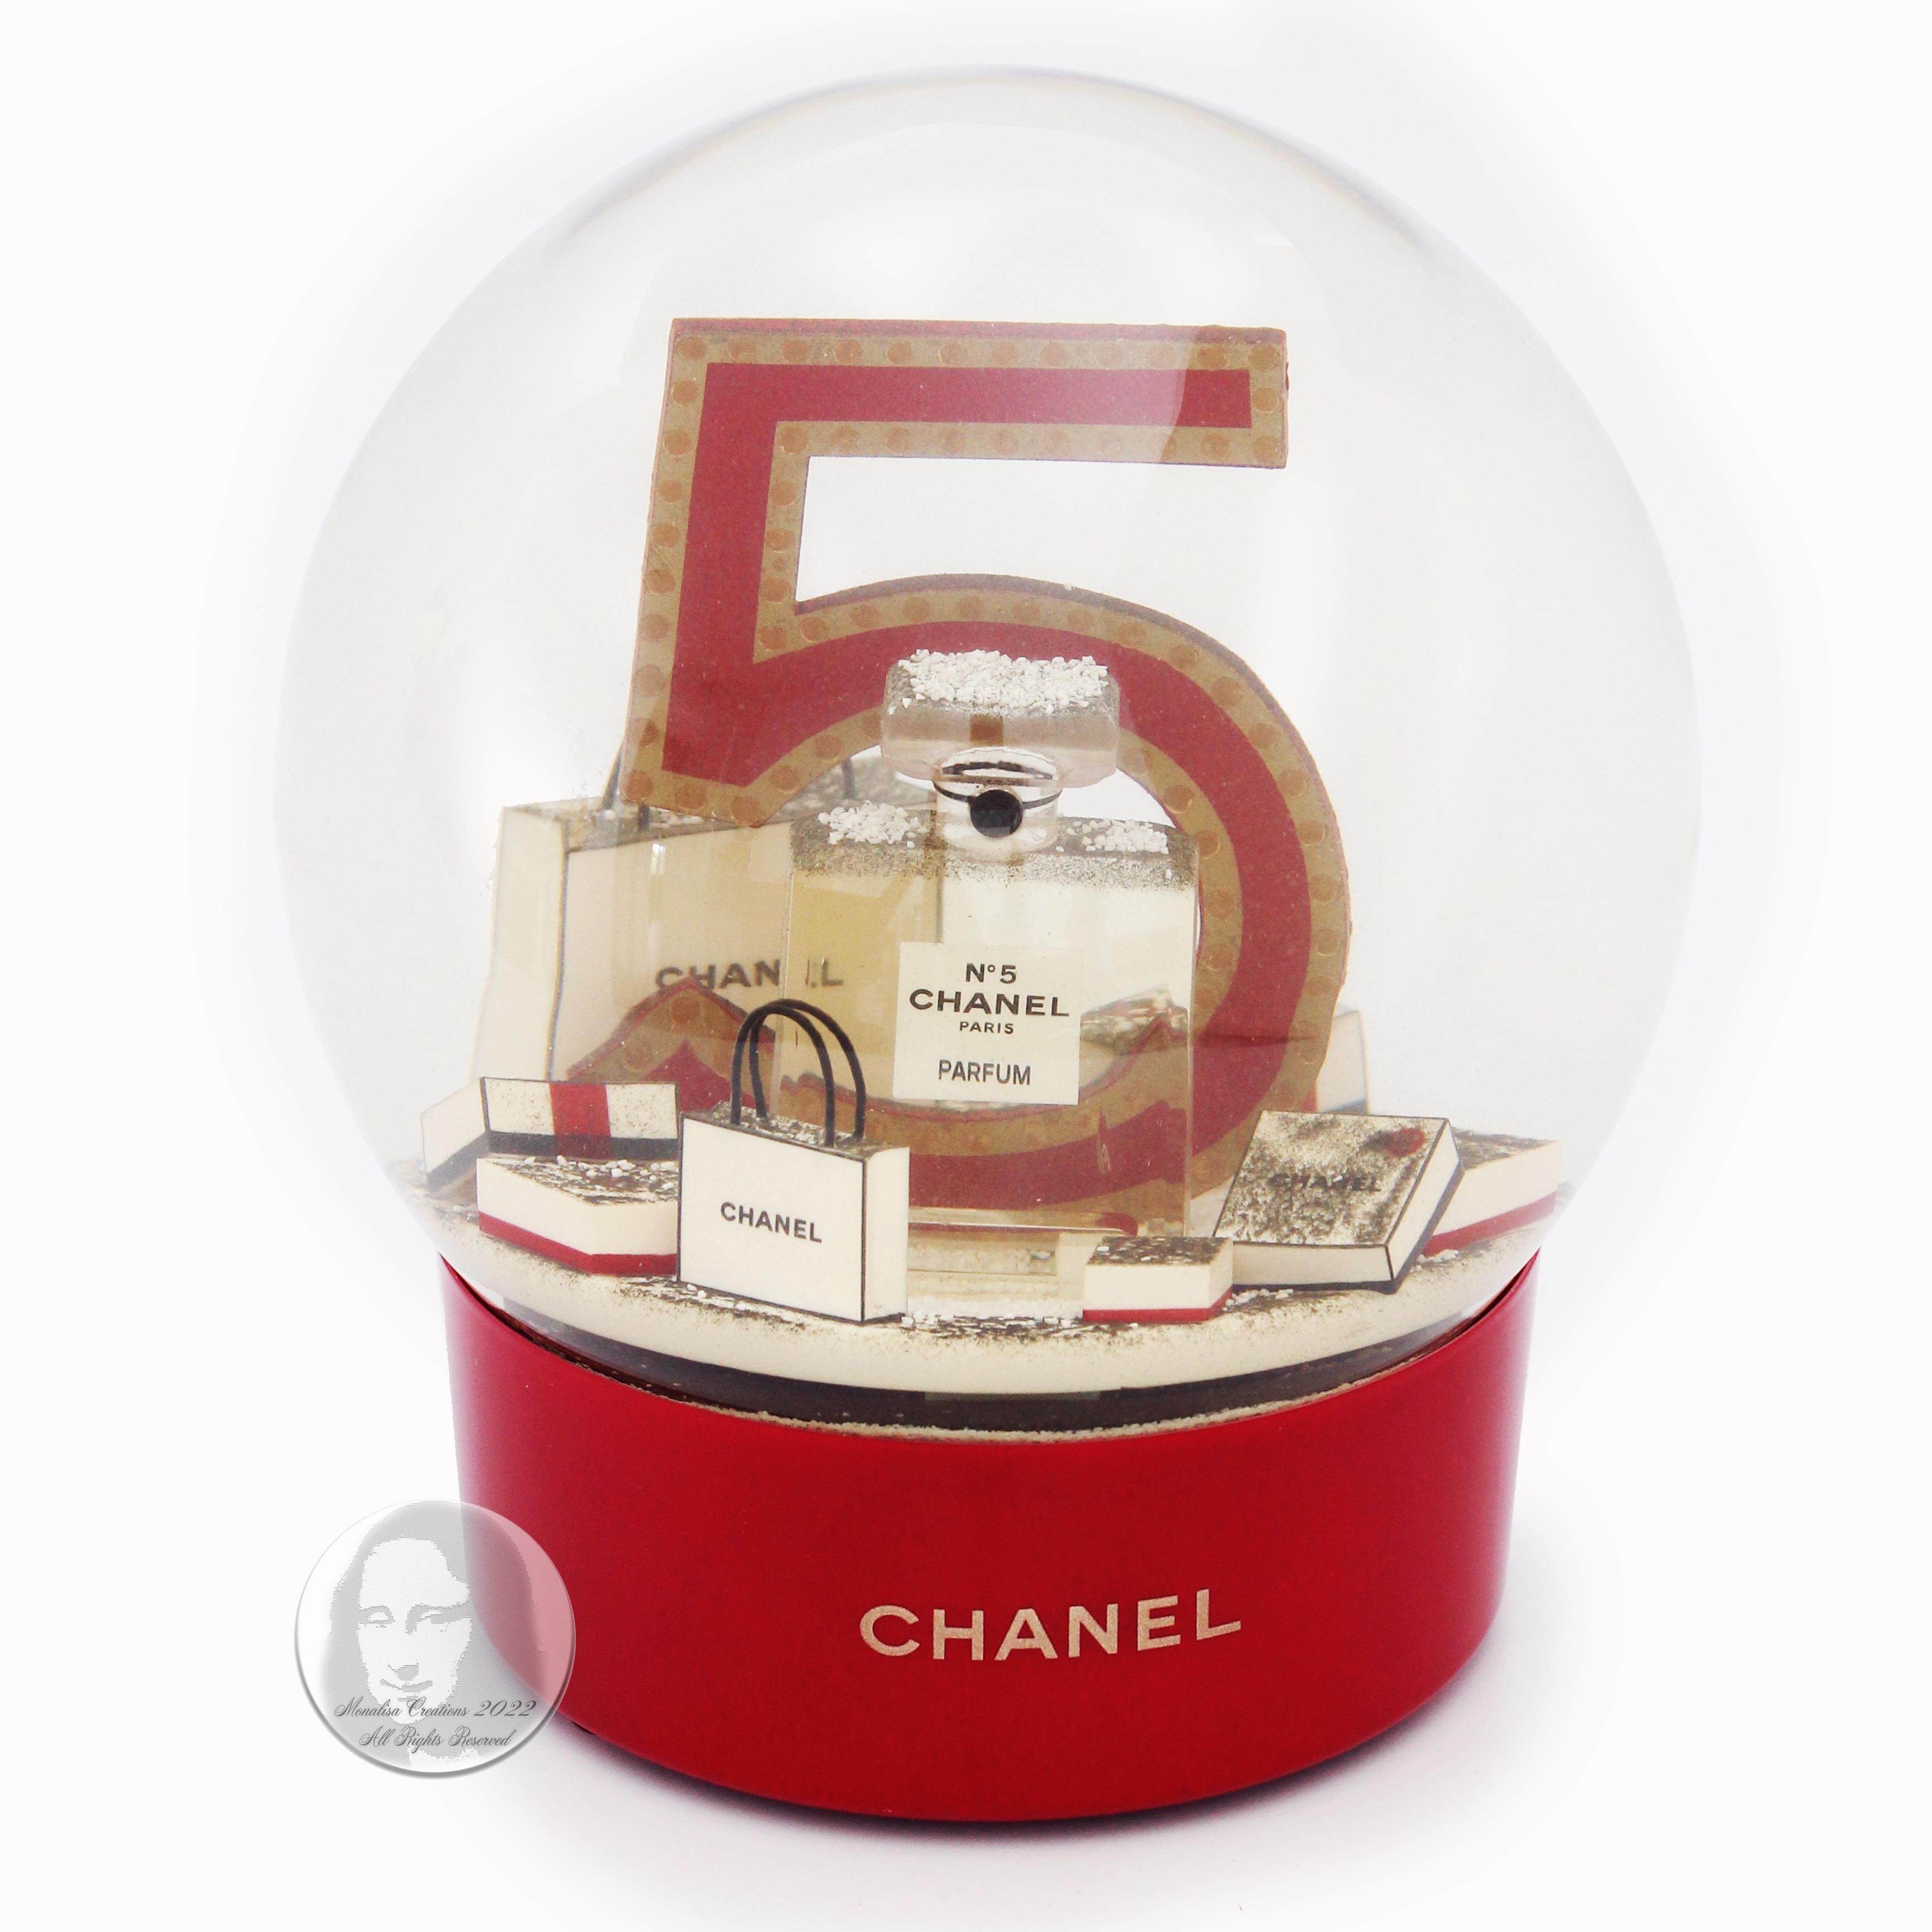 Authentic, preowned CHANEL Snow Globe with Chanel No 5 Perfume Bottle, Gift Boxes and Shopping Bags, released in limited quantities to VIP clients in 2015. Please note that this is the larger globe, which measures approximately 8in H x 8in W (and